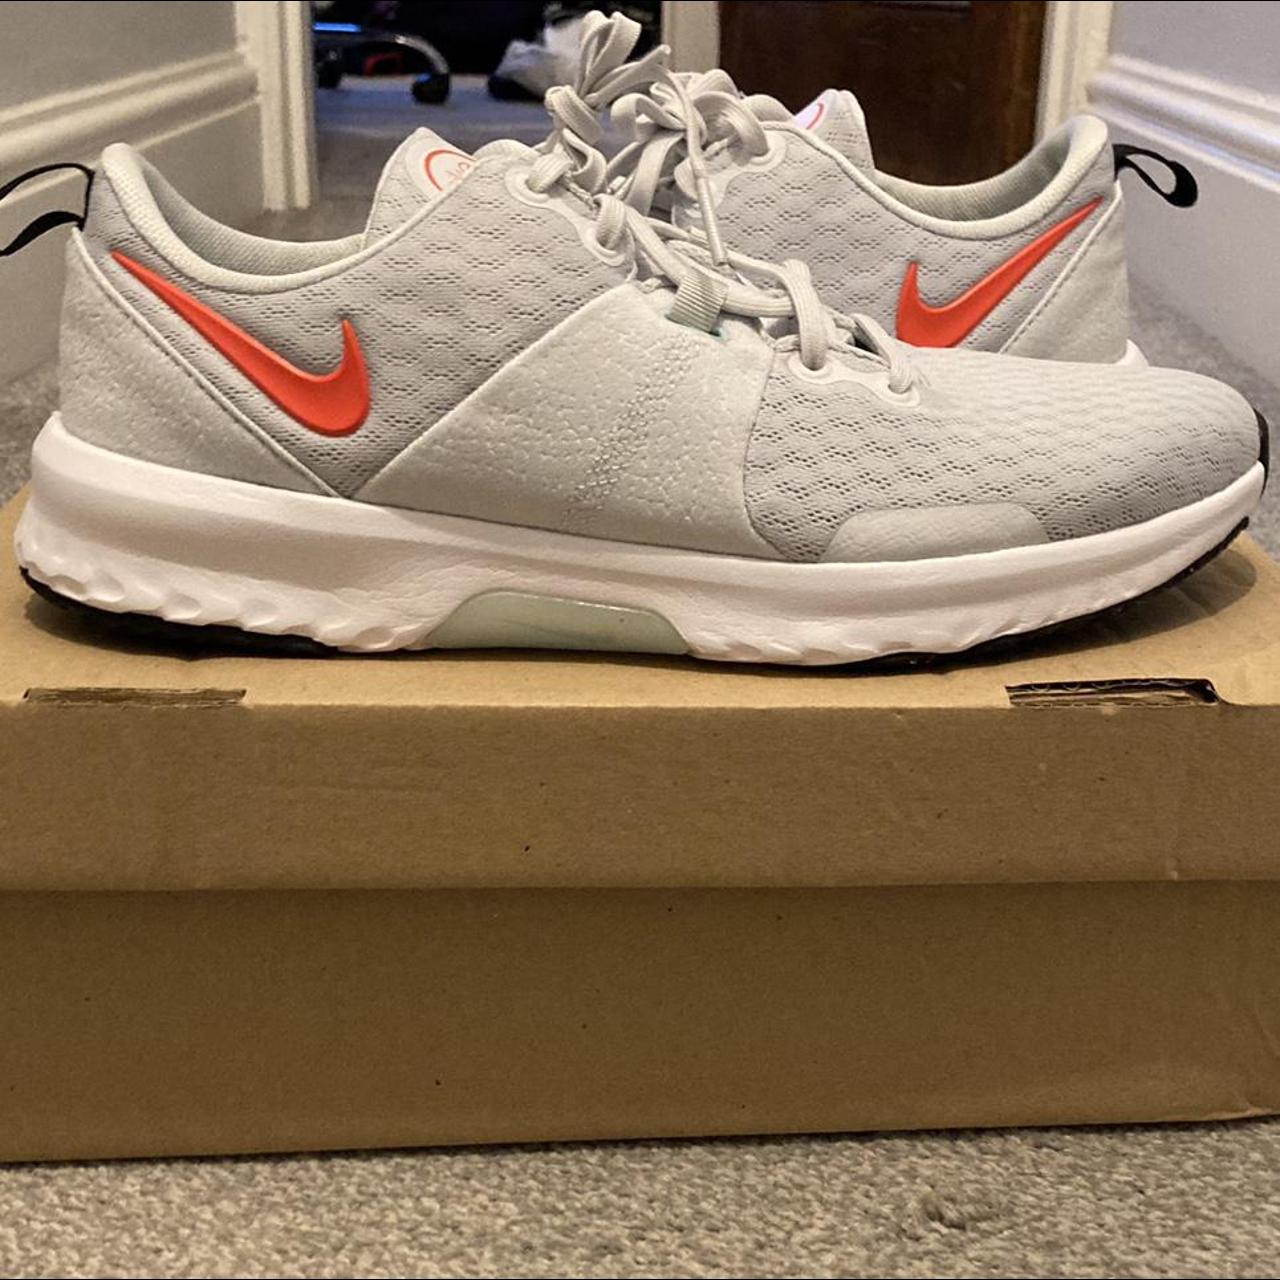 Nike Training City Trainer 3 in white and red Box - Depop